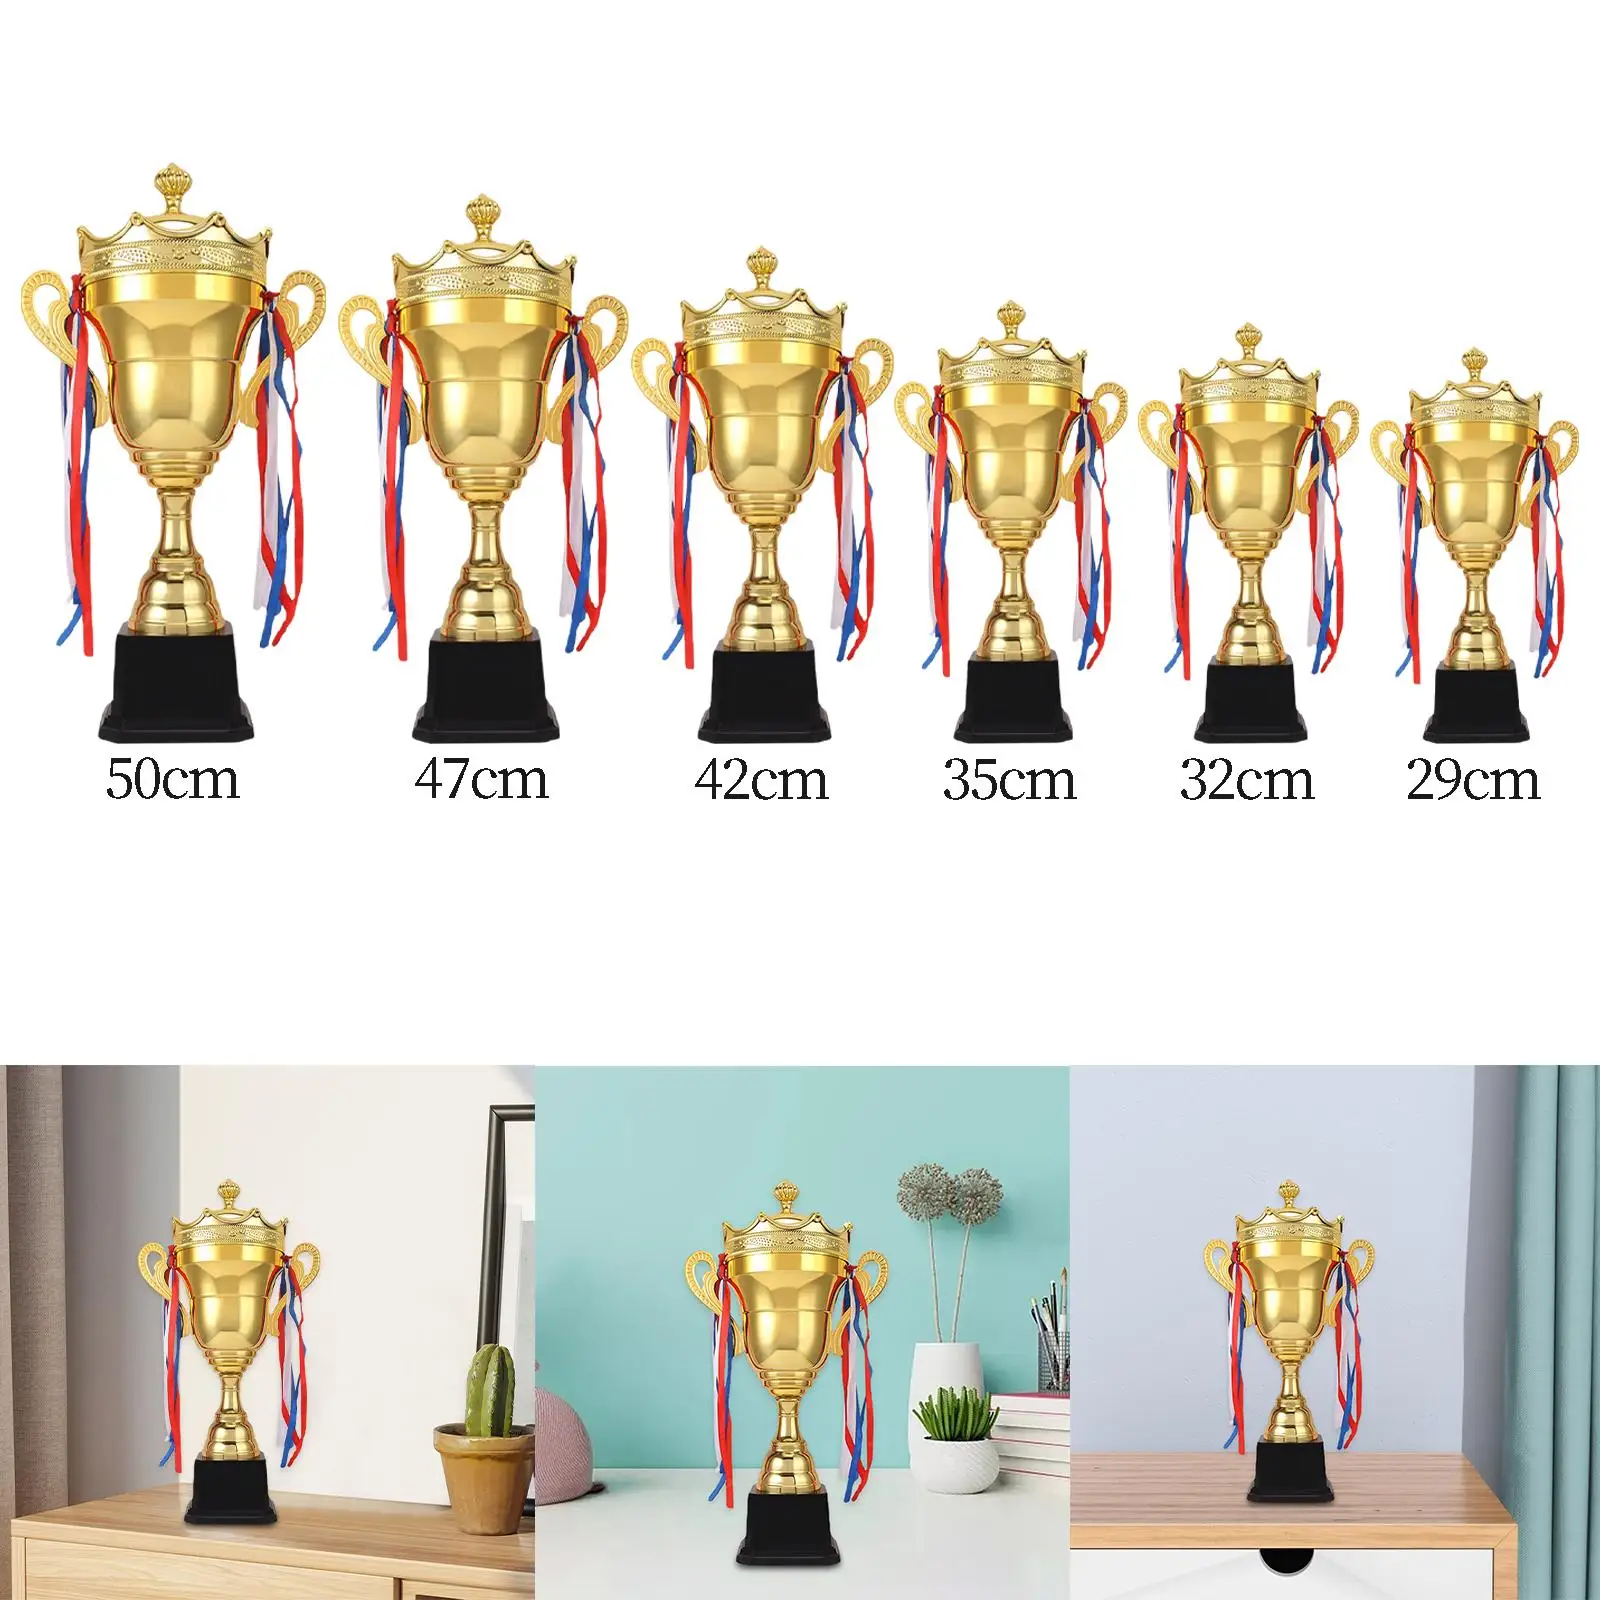 Award Trophy with Base Winning Trophies Prize for Football Soccer Baseball Event